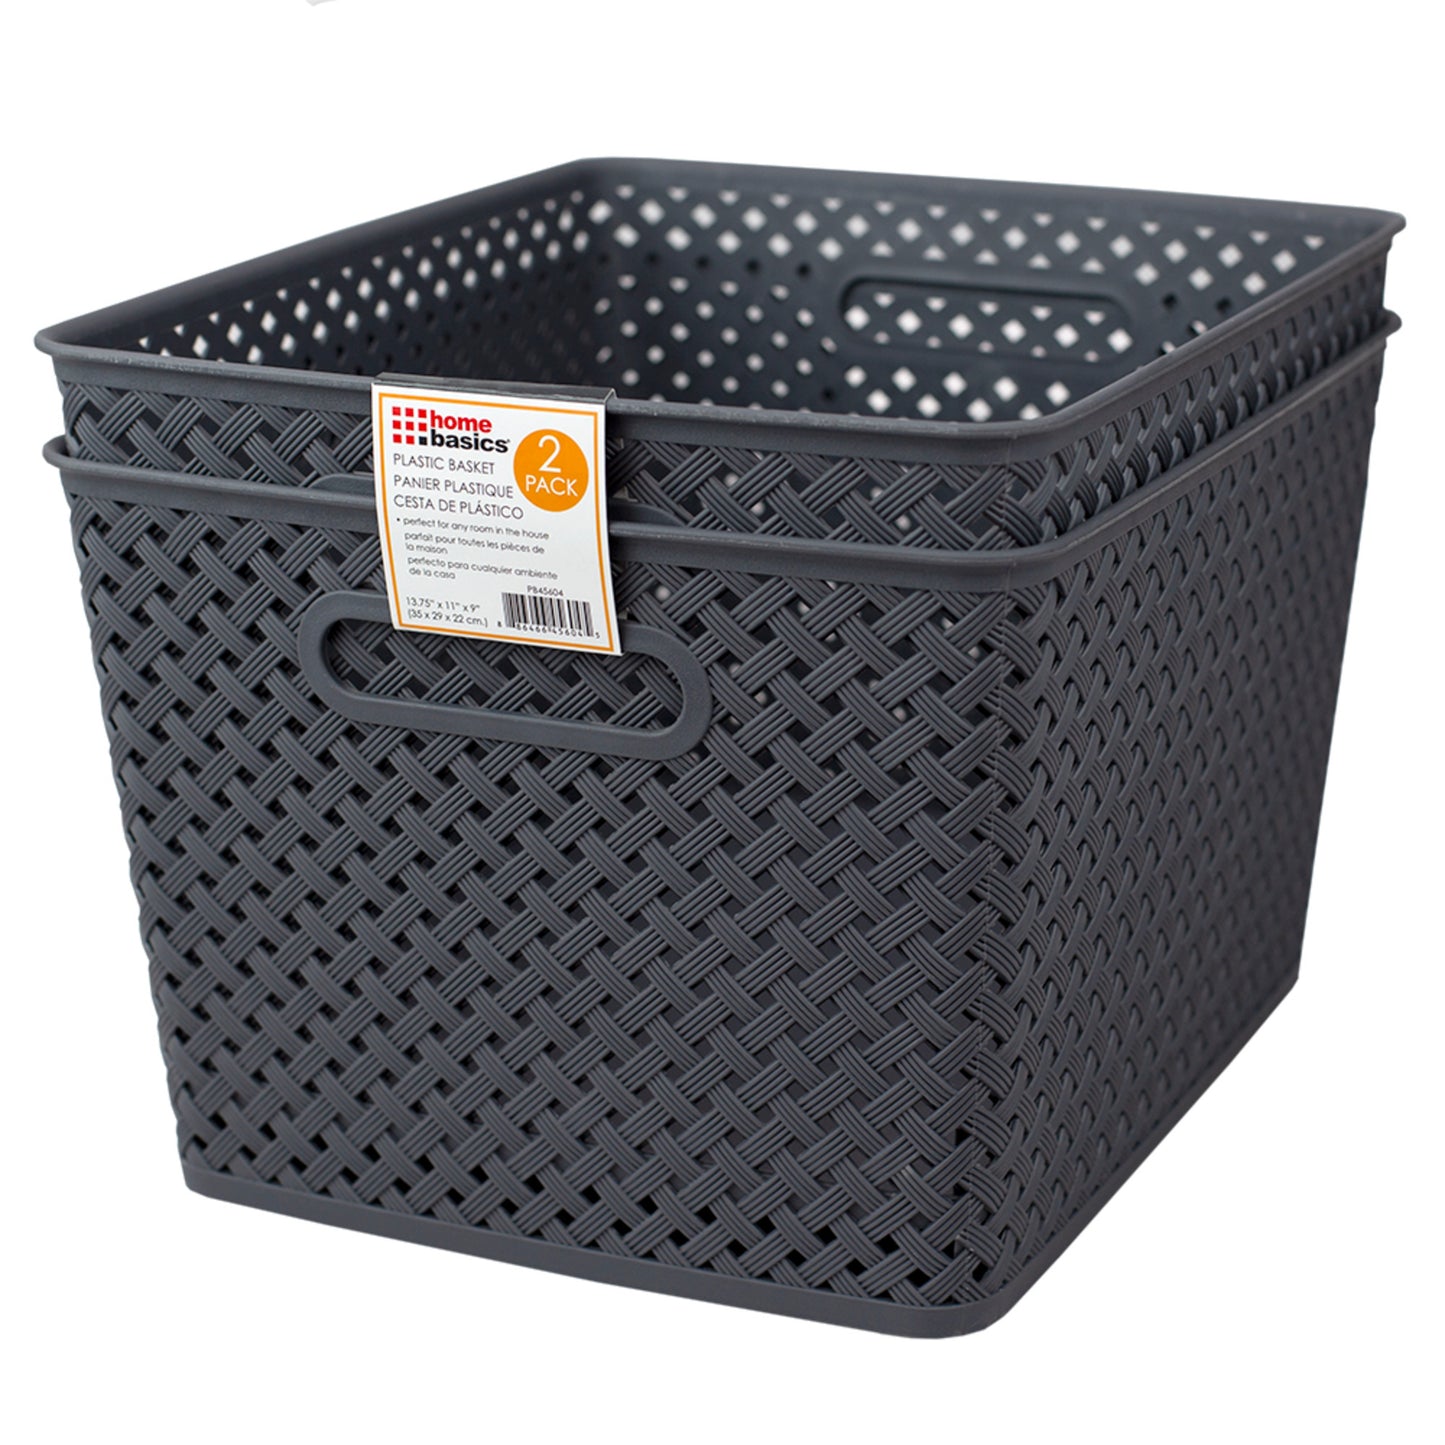 Home Basics Triple Woven 14" x 11.75" x 8.75" Multi-Purpose Stackable Plastic Storage Basket, (Pack of 2), Grey - Grey